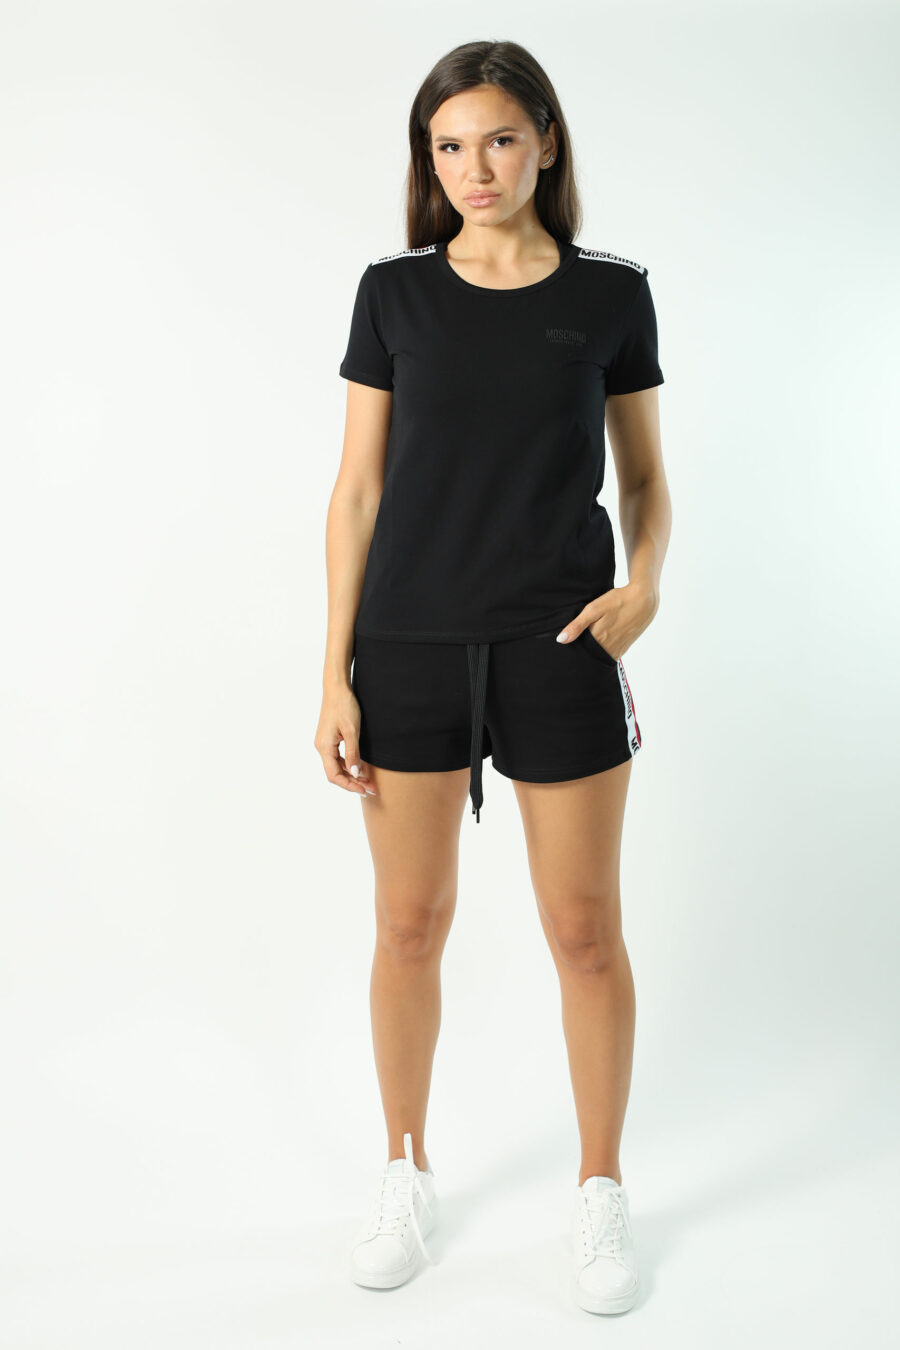 Black slim fit T-shirt with logo tape on shoulders - Photos 2903